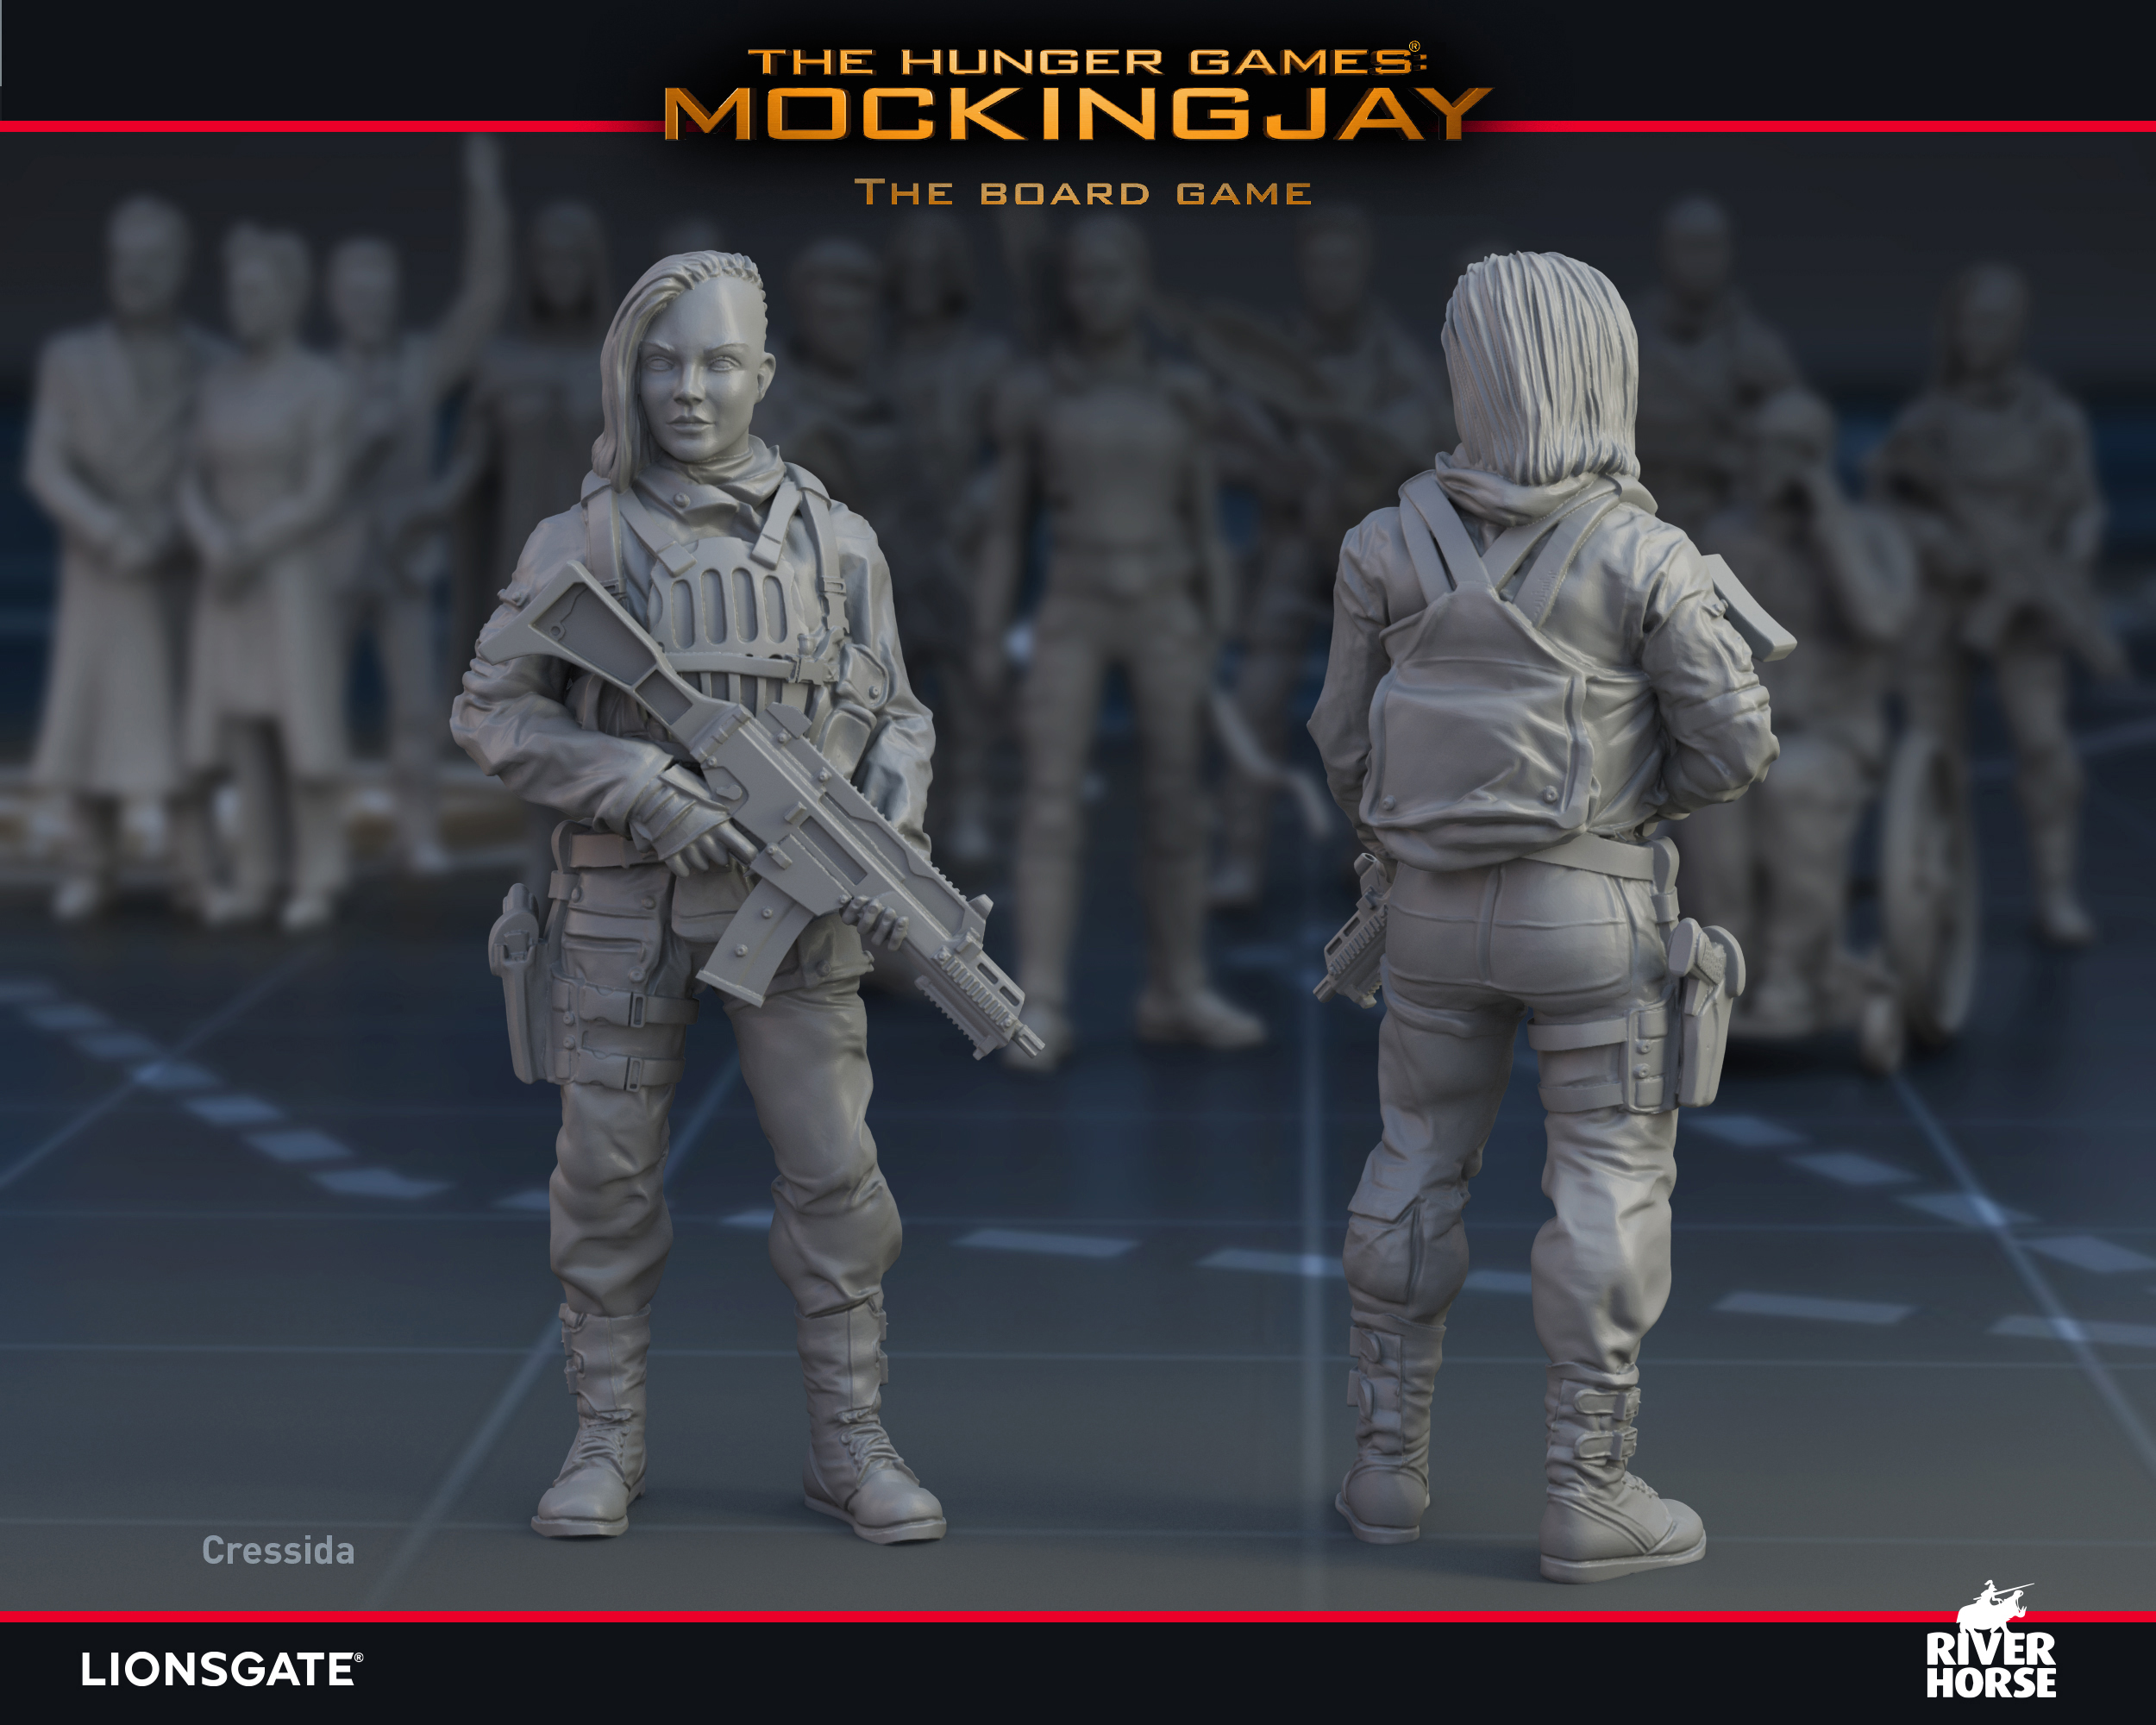 Render of Cressida for The Hunger Games: Mockingjay - The Board Game by River Horse